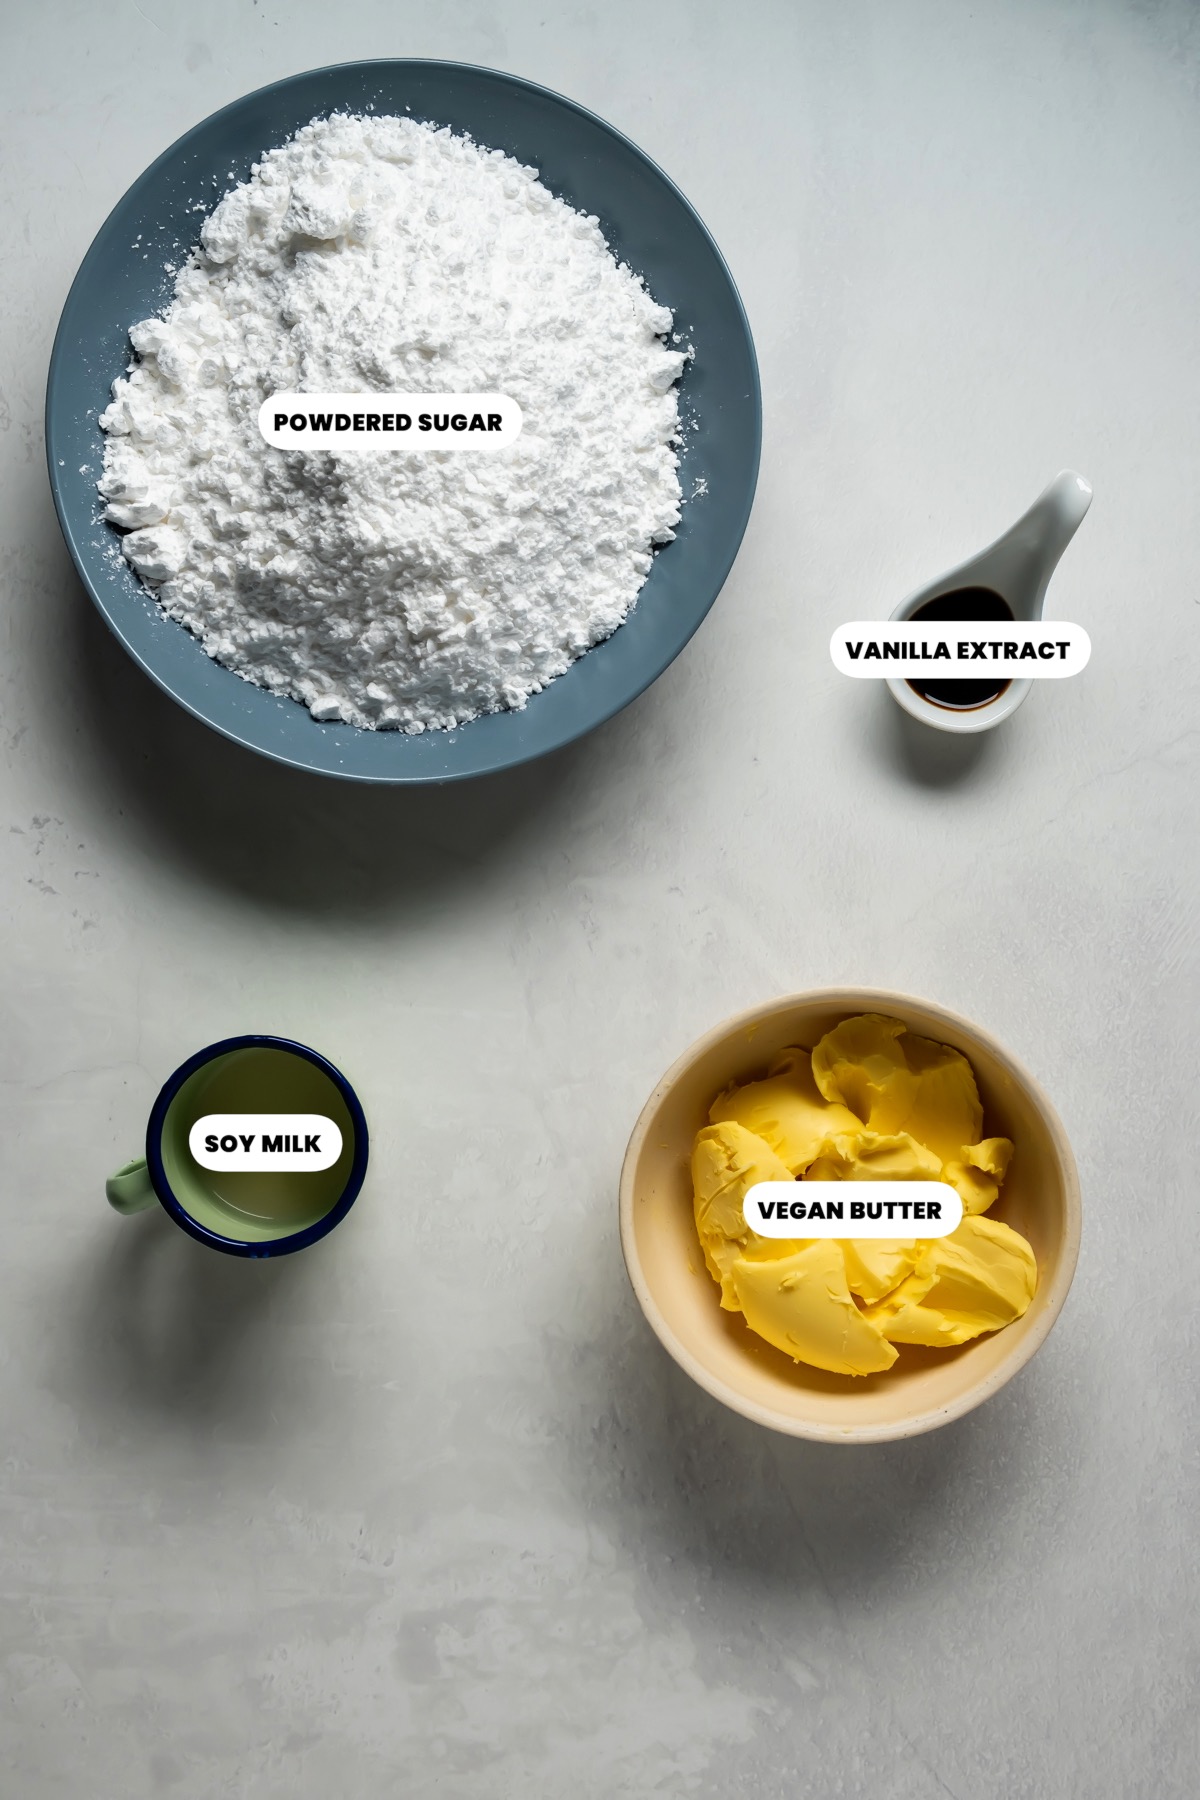 Photo of the ingredients needed to make frosting.